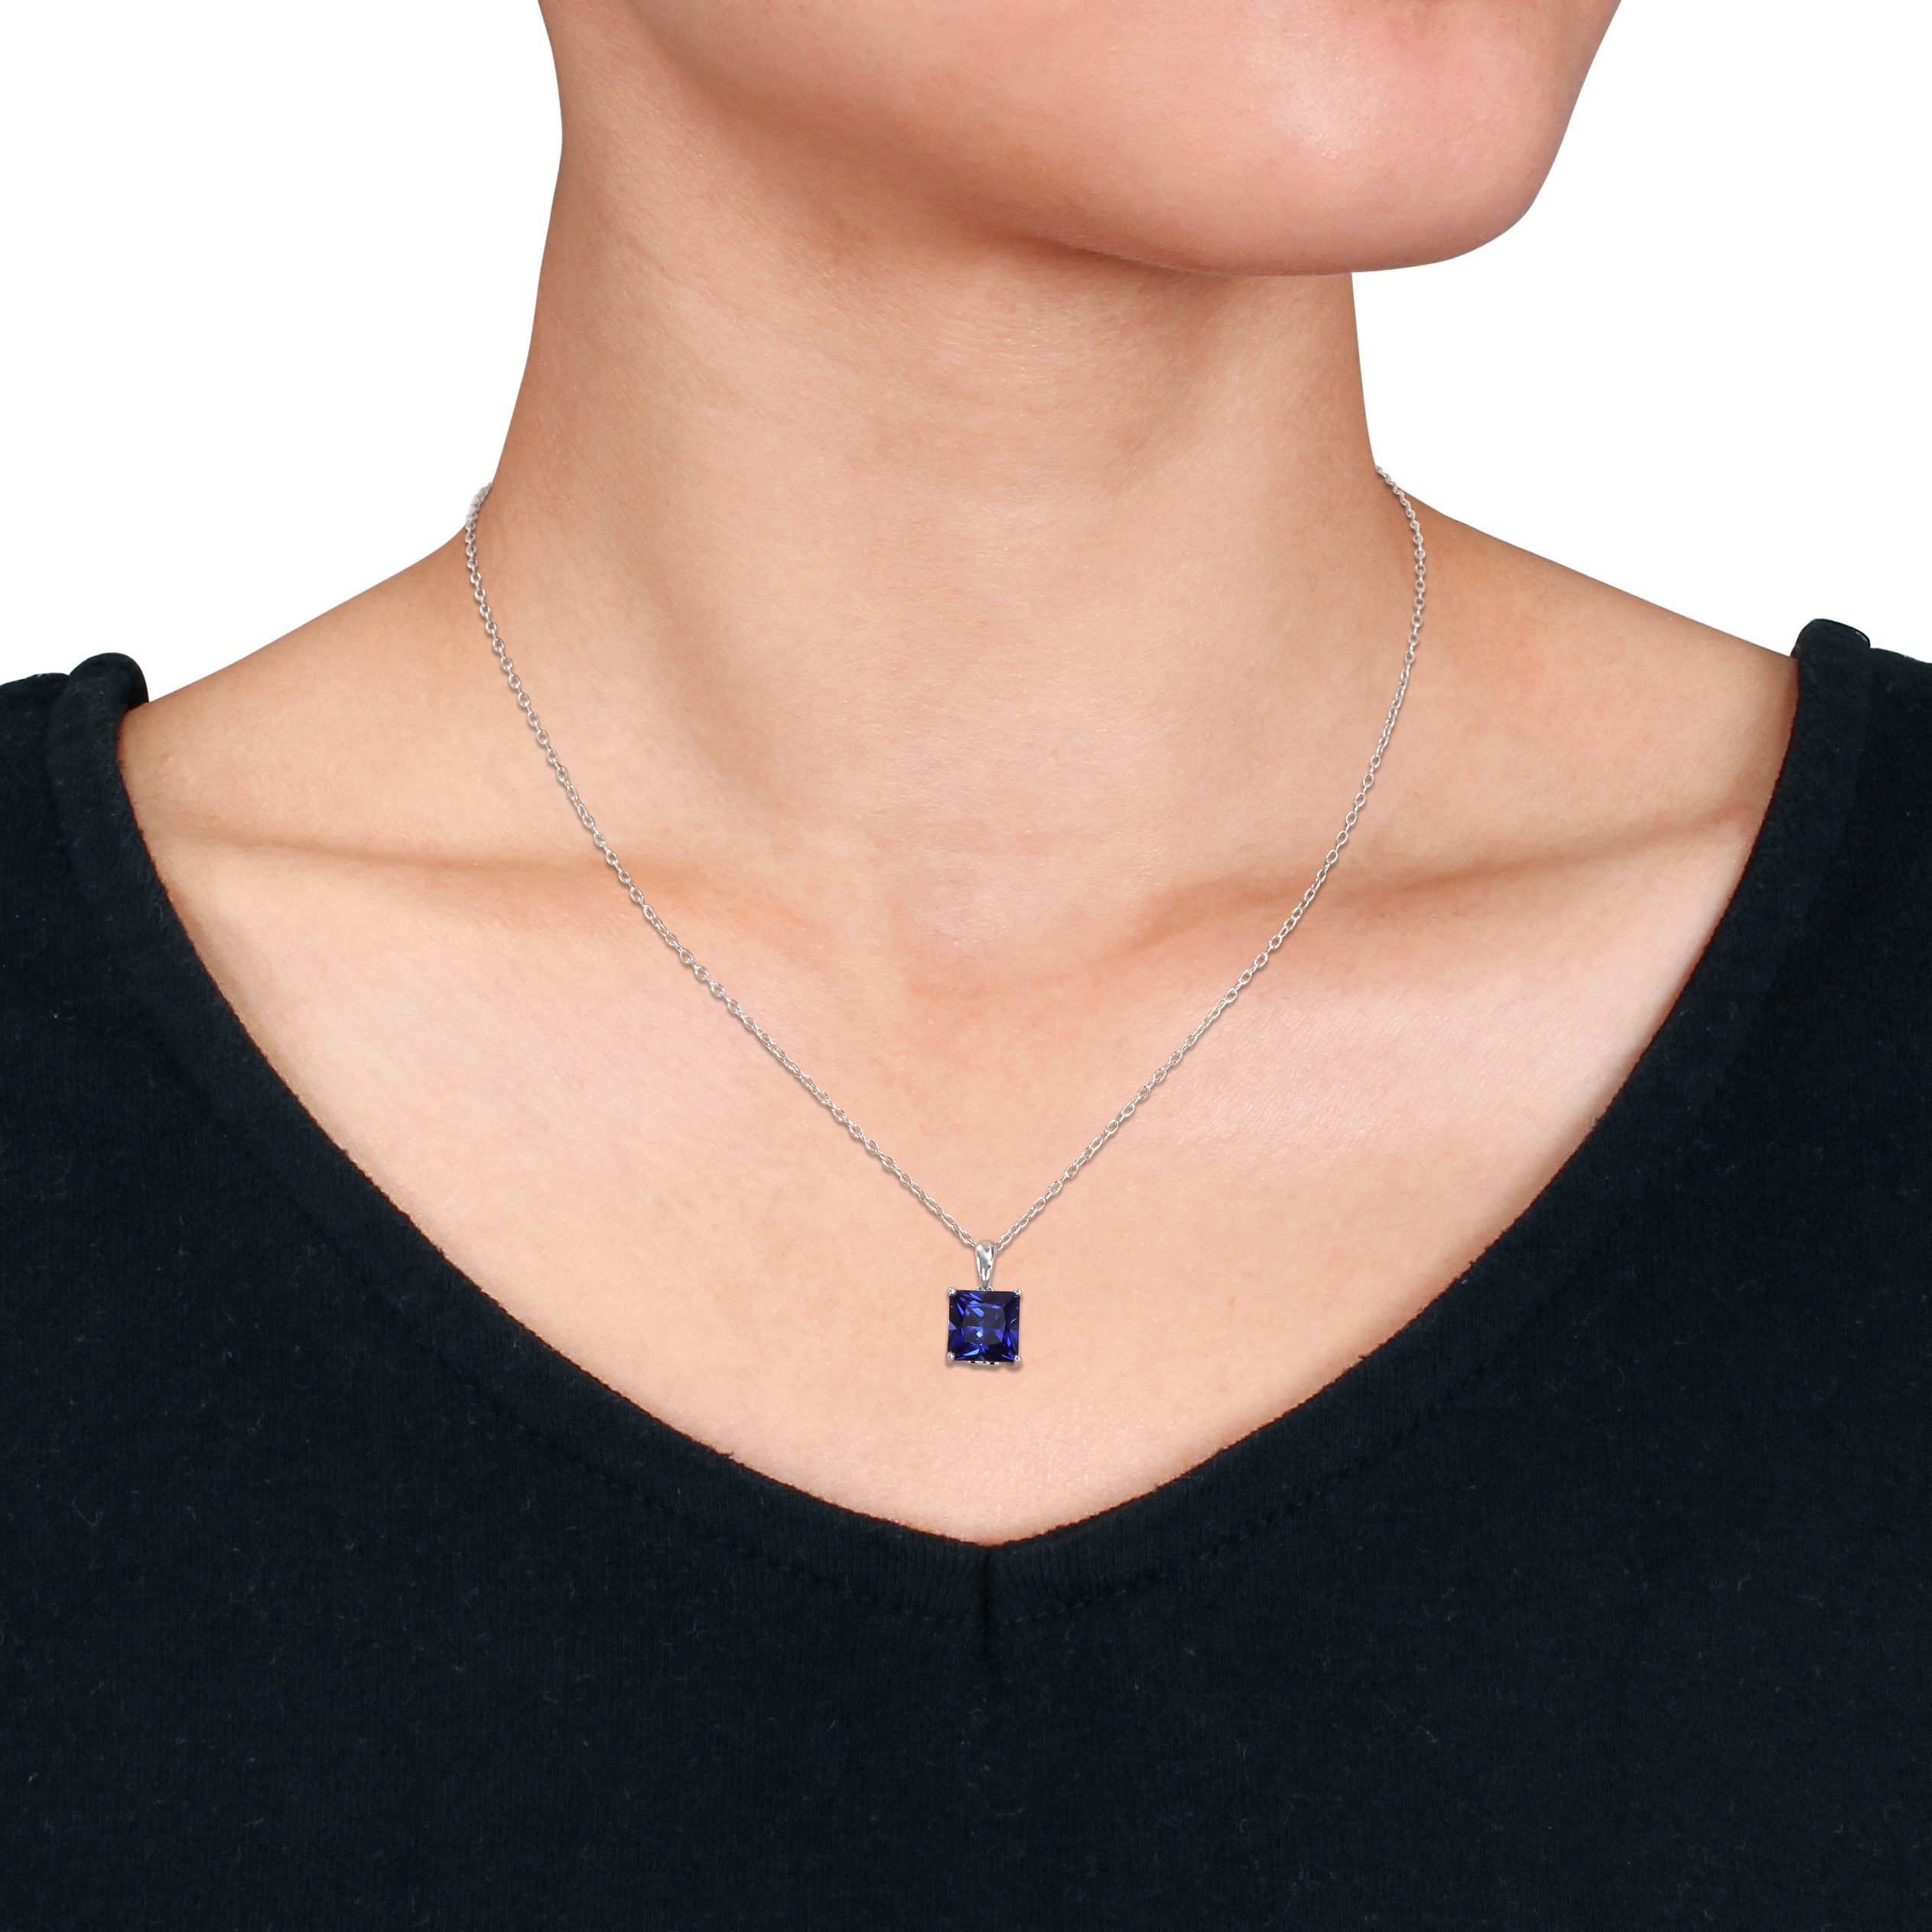 3.06 CT TGW Princess Cut Created Blue Sapphire Solitaire Heart Design Pendant with Chain in Sterling Silver - 18 in.